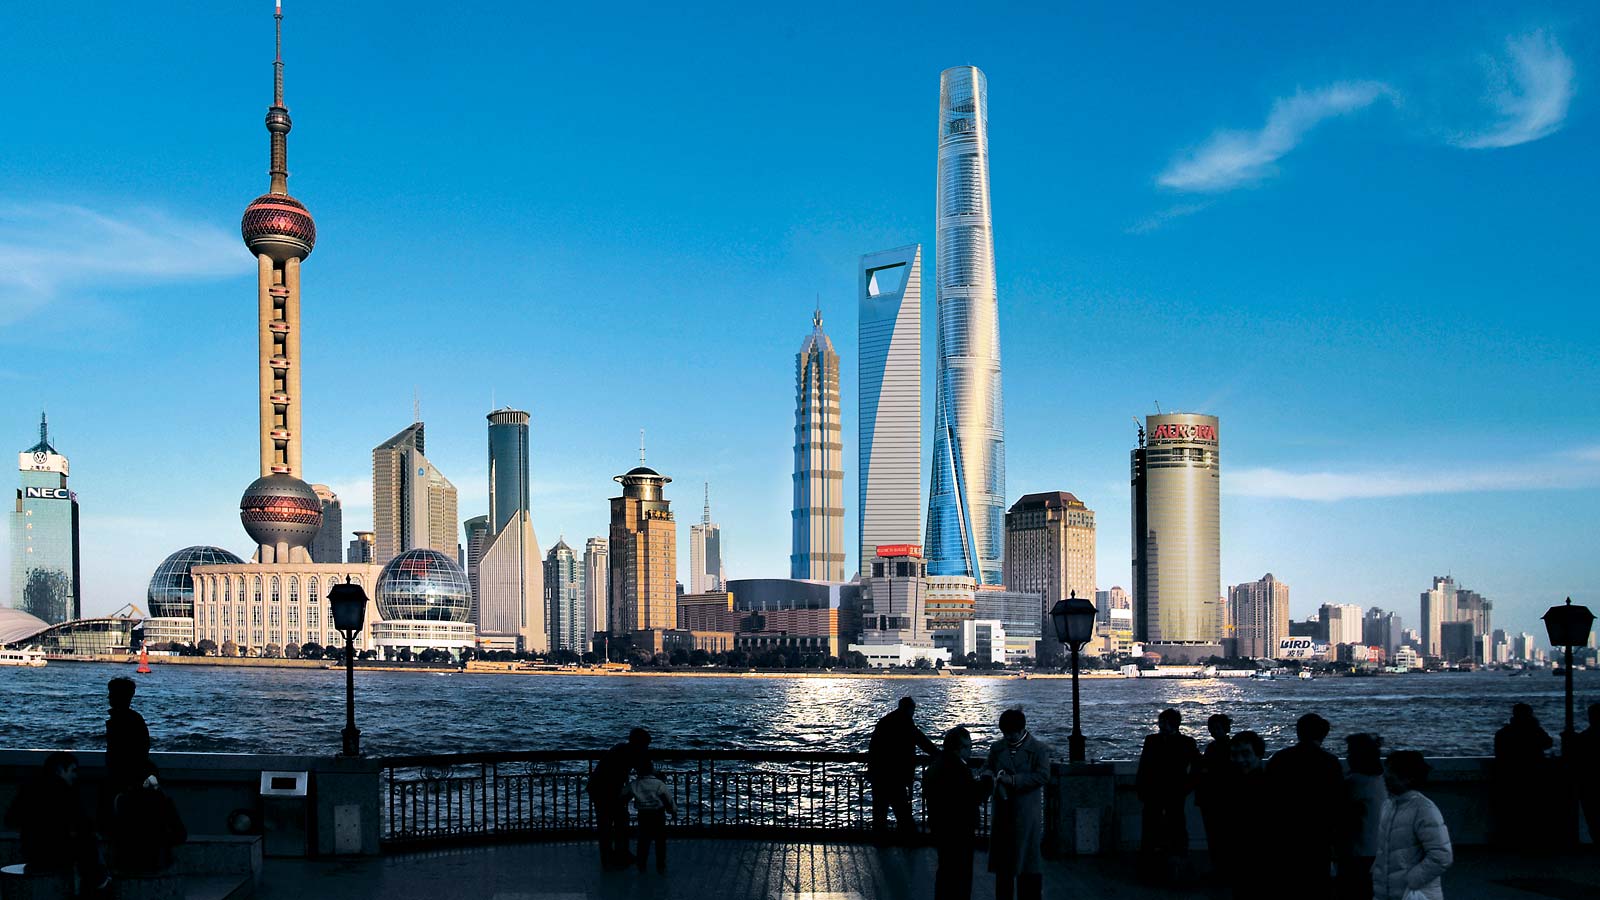 The Shanghai Tower Will Soon Feature the World’s Fastest Elevator at 45 MPH